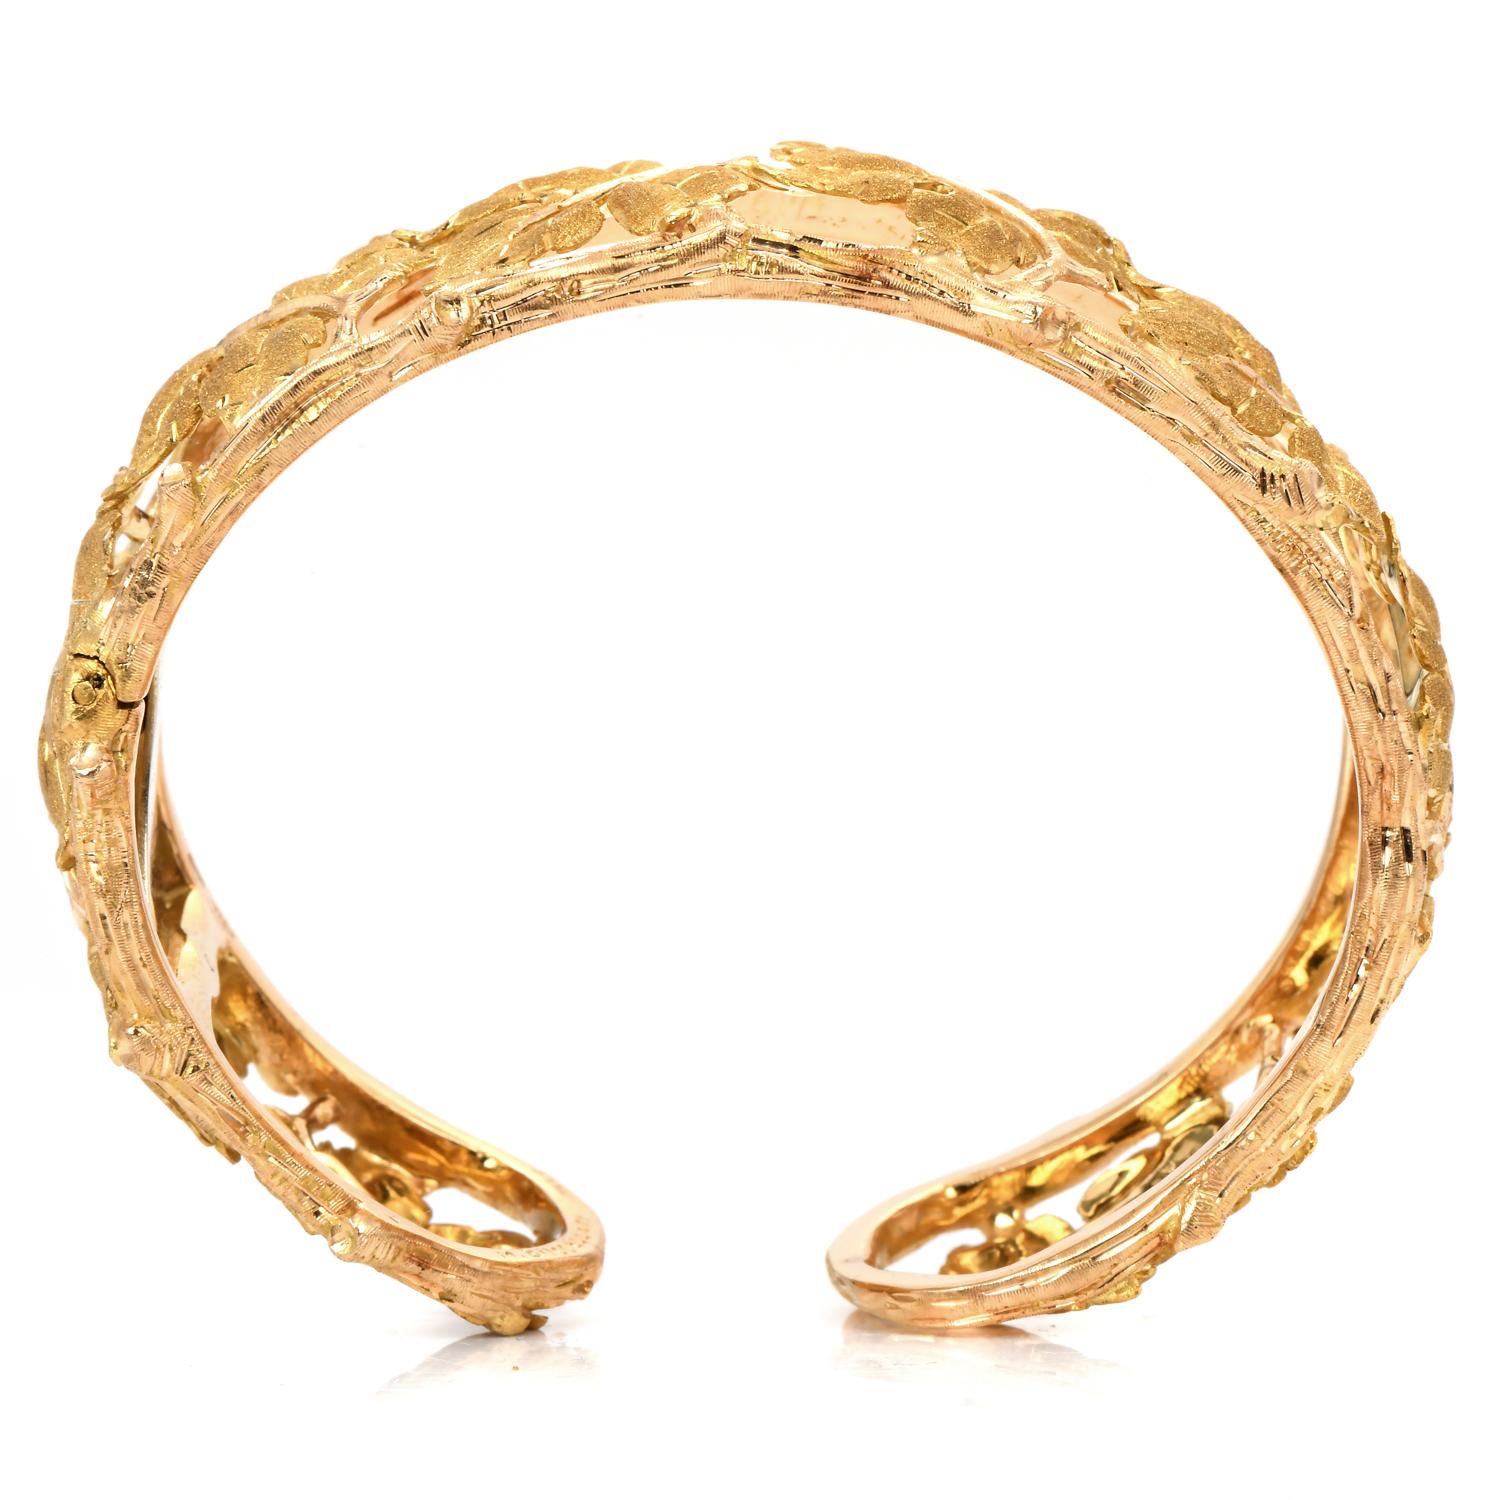 A luxurious bracelet from the Original Mario Buccellati, from approximately 1960s.

Crafted in solid 18K yellow gold, featuring the exquisite hand-made textured Maple Leaf Motif design from the Buccellati jewelry.

It is accompanied by a Buccelatti